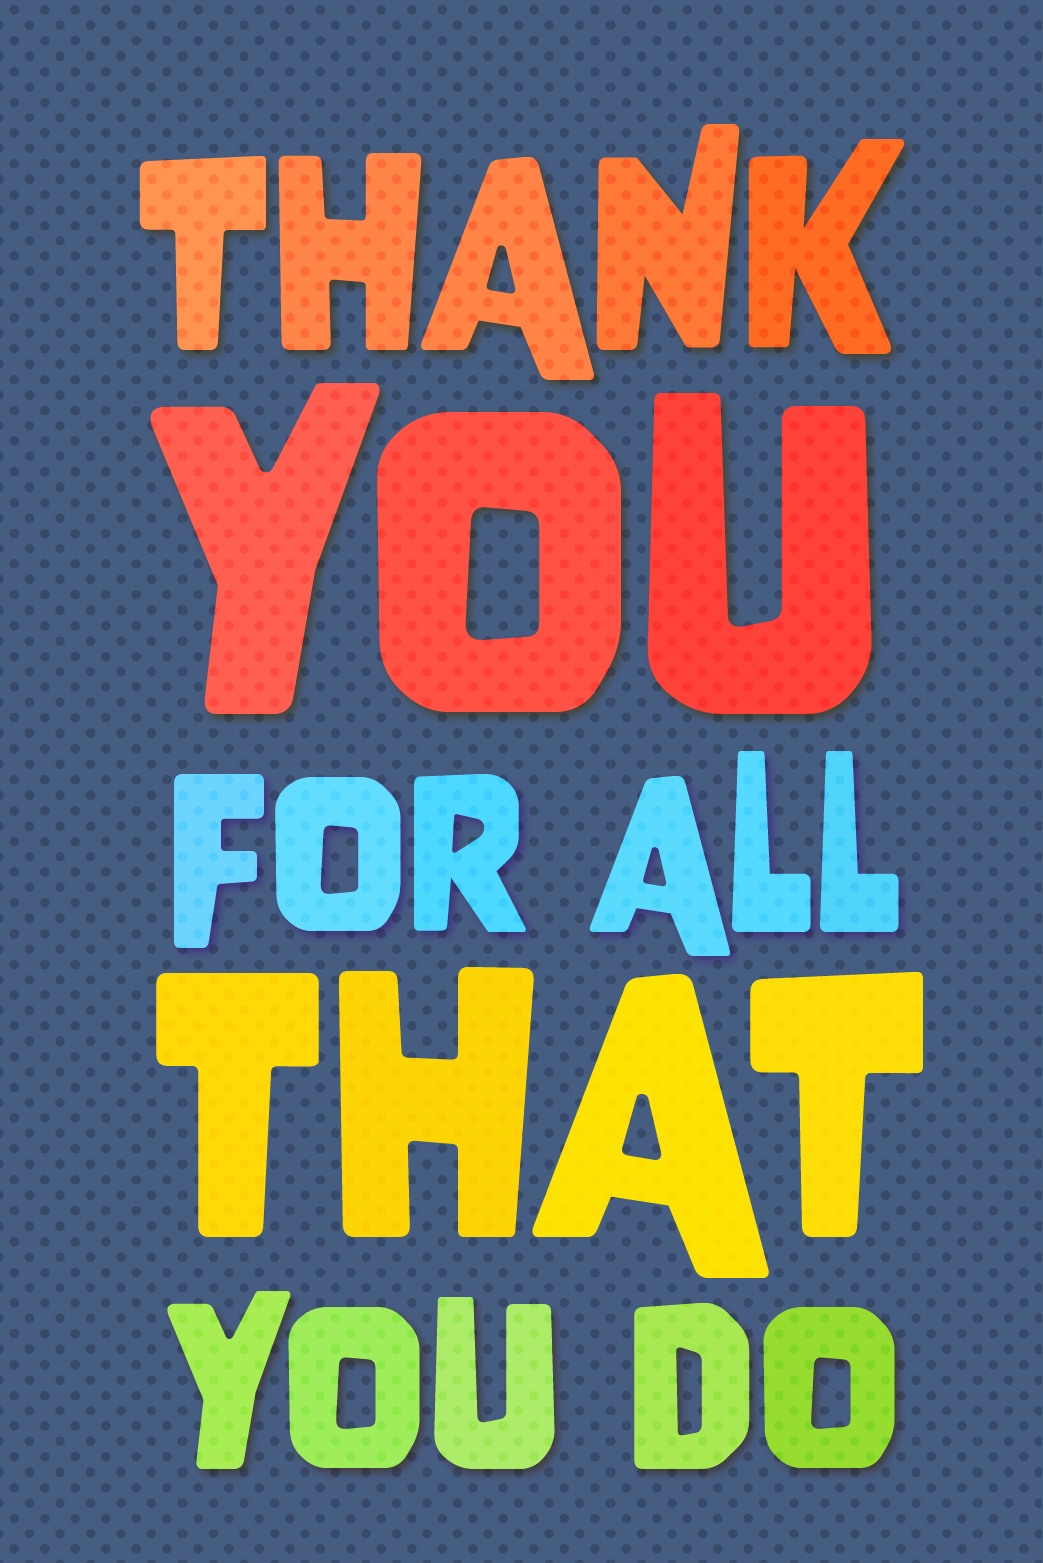 Thank You For All That You Do - Administrative Professionals Day ...